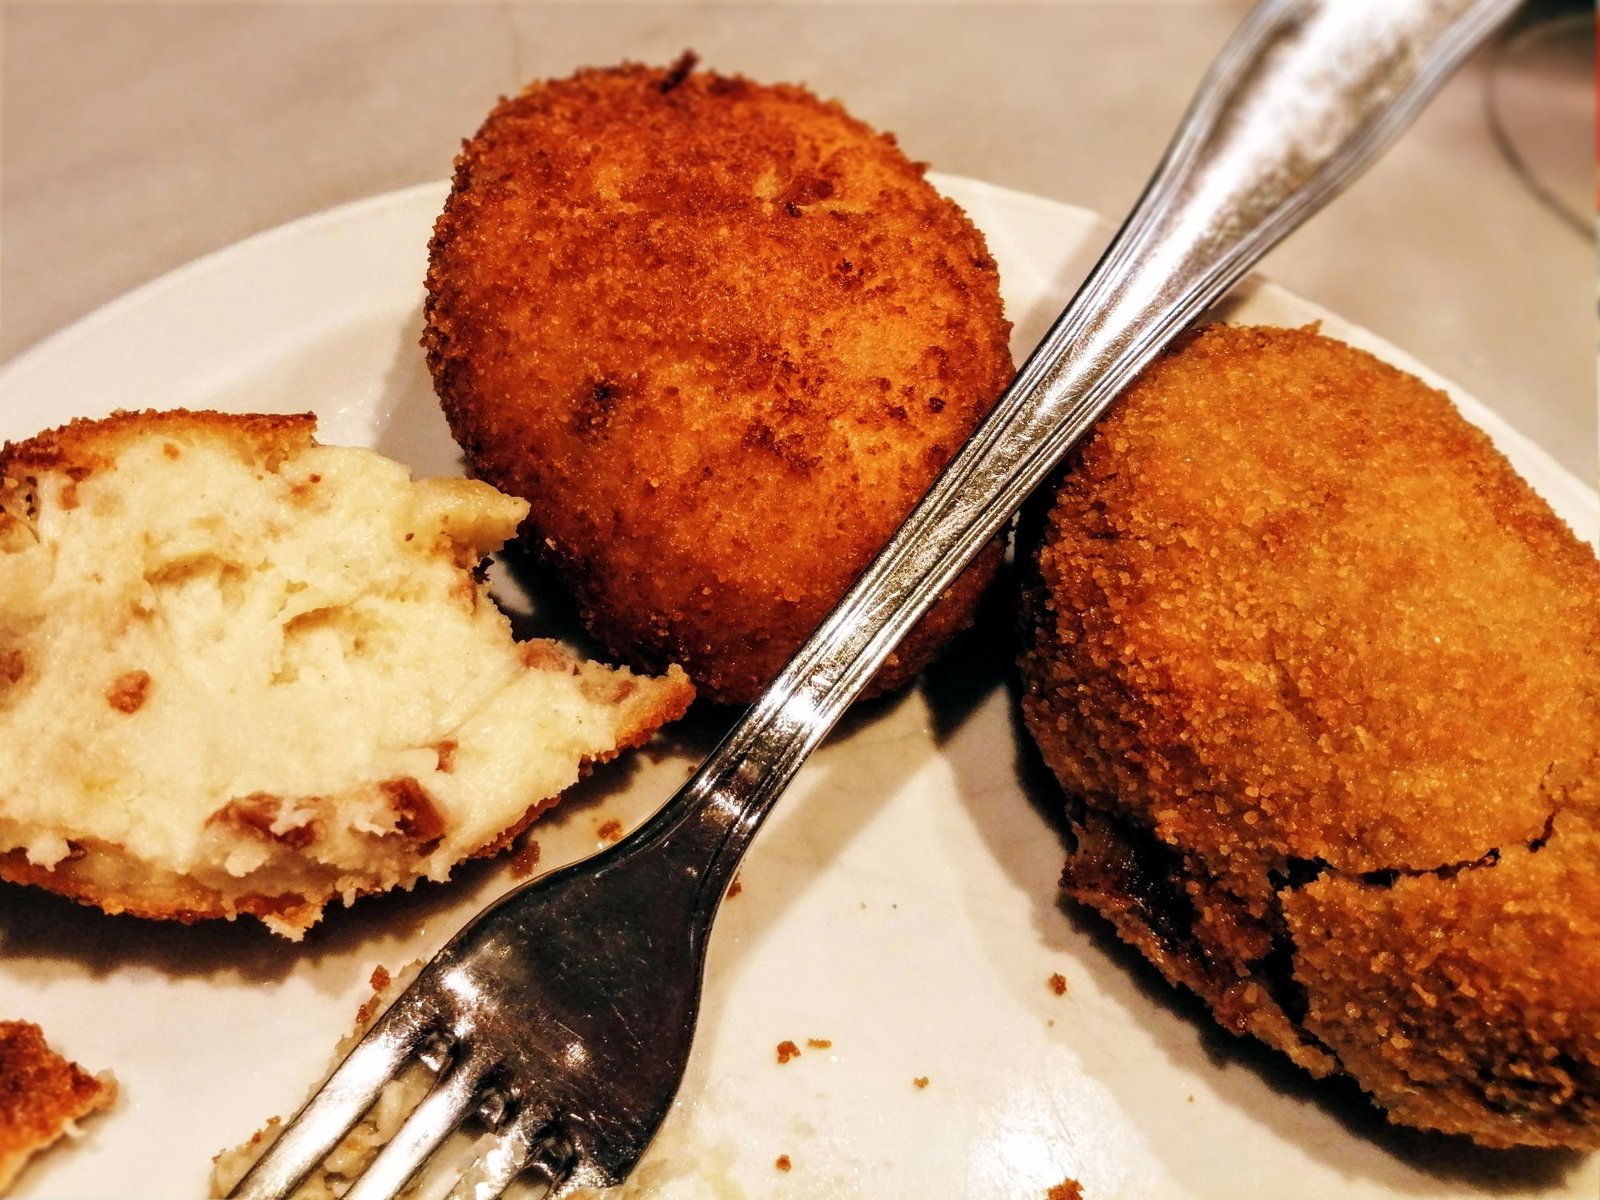 A few golden deep-fried croquettas sit on a plate with a fork